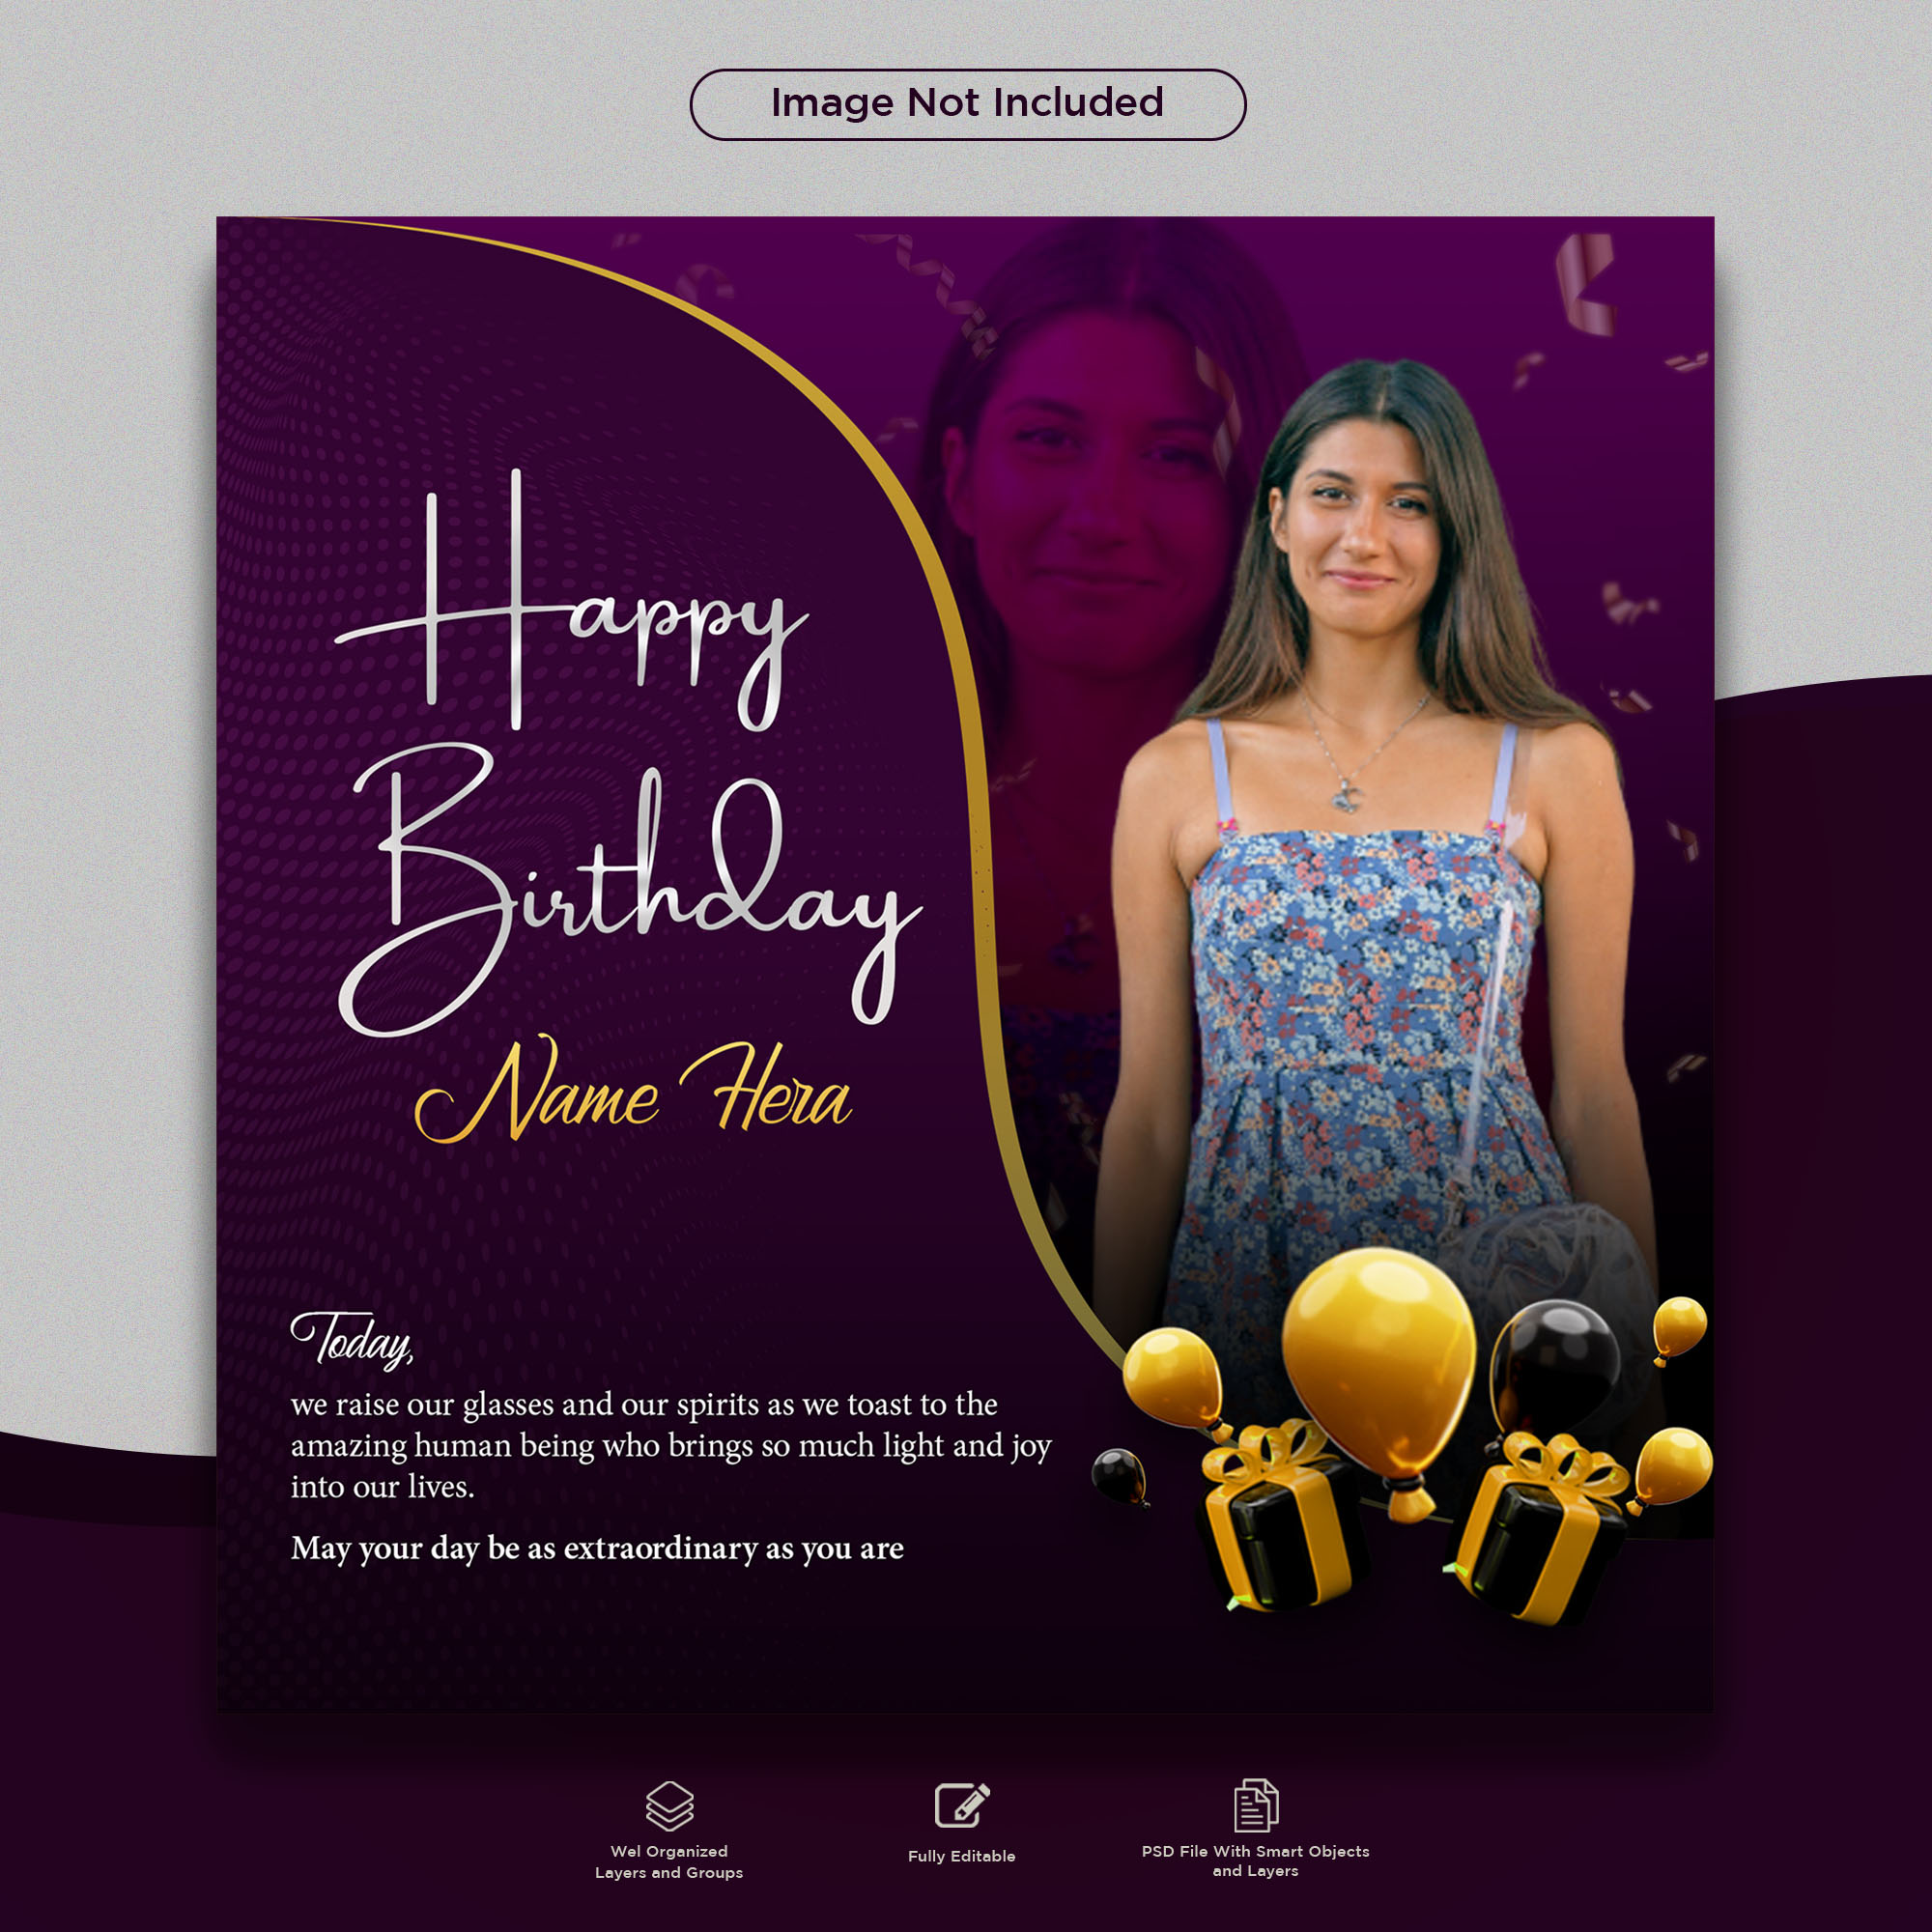 Happy birthday wish and celebration post design PSD template for social media cover image.